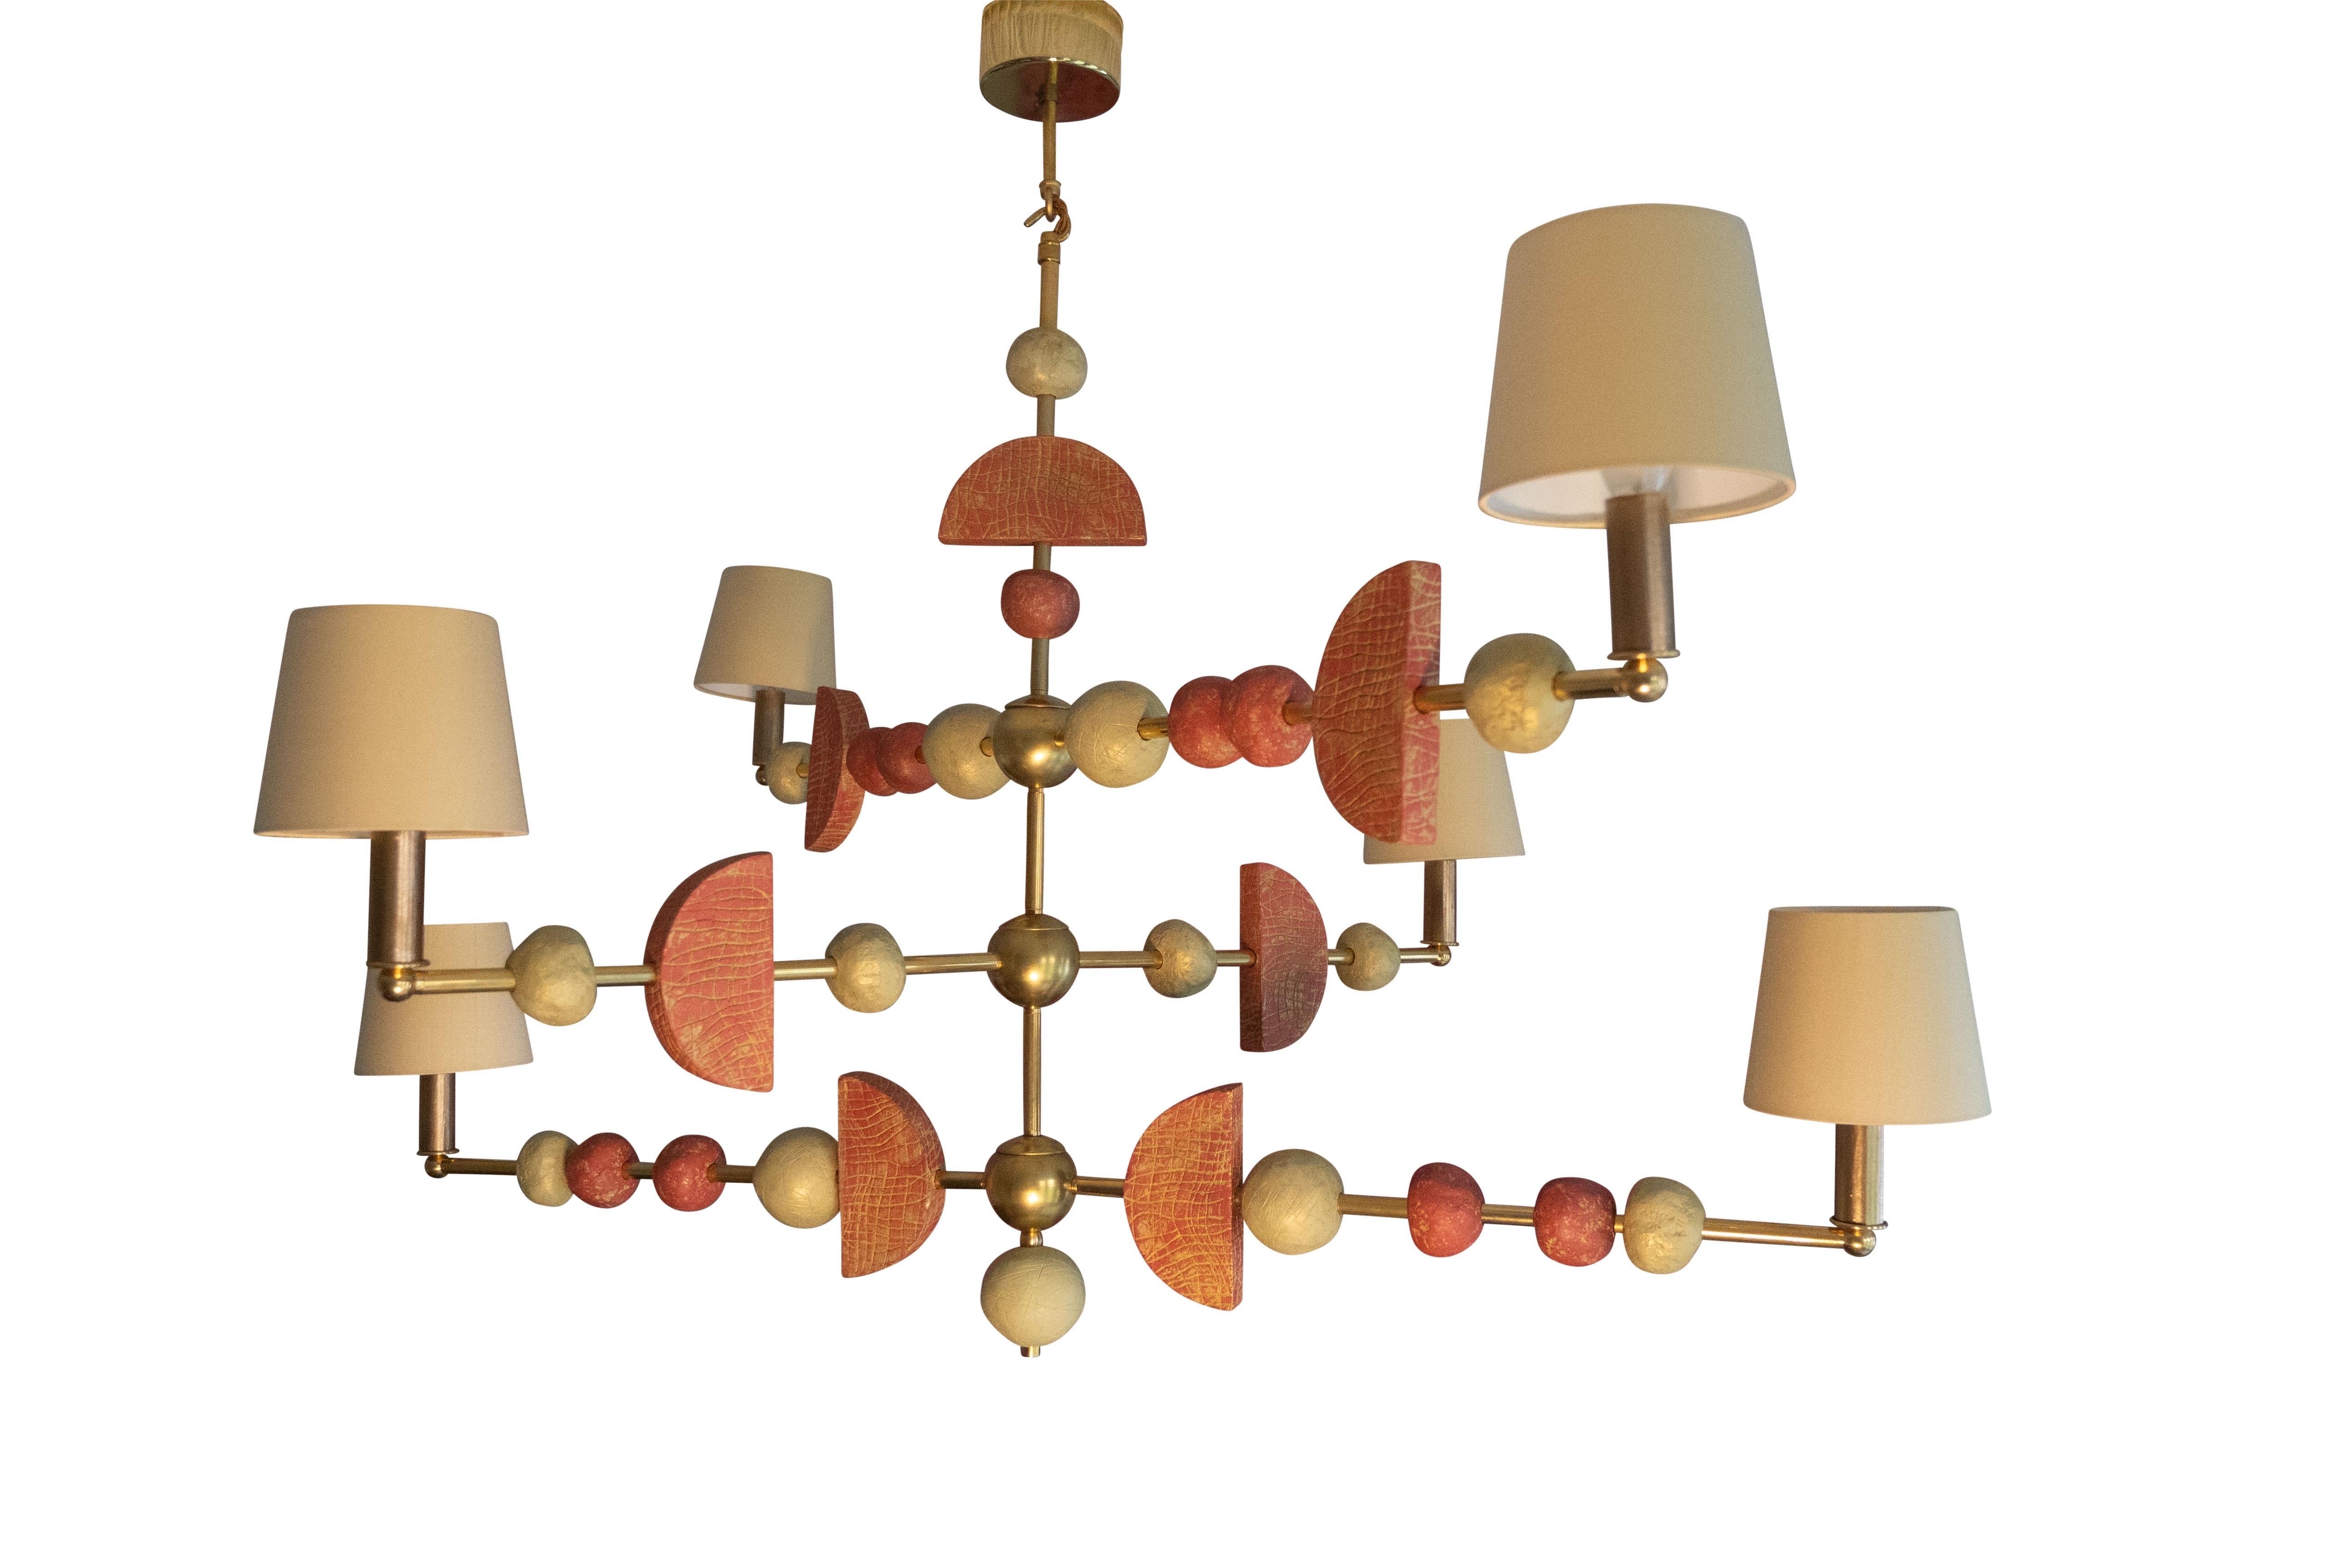 Cast Soho Chandelier, Contemporary, Brass with Sculpted Spheres by Margit Wittig For Sale